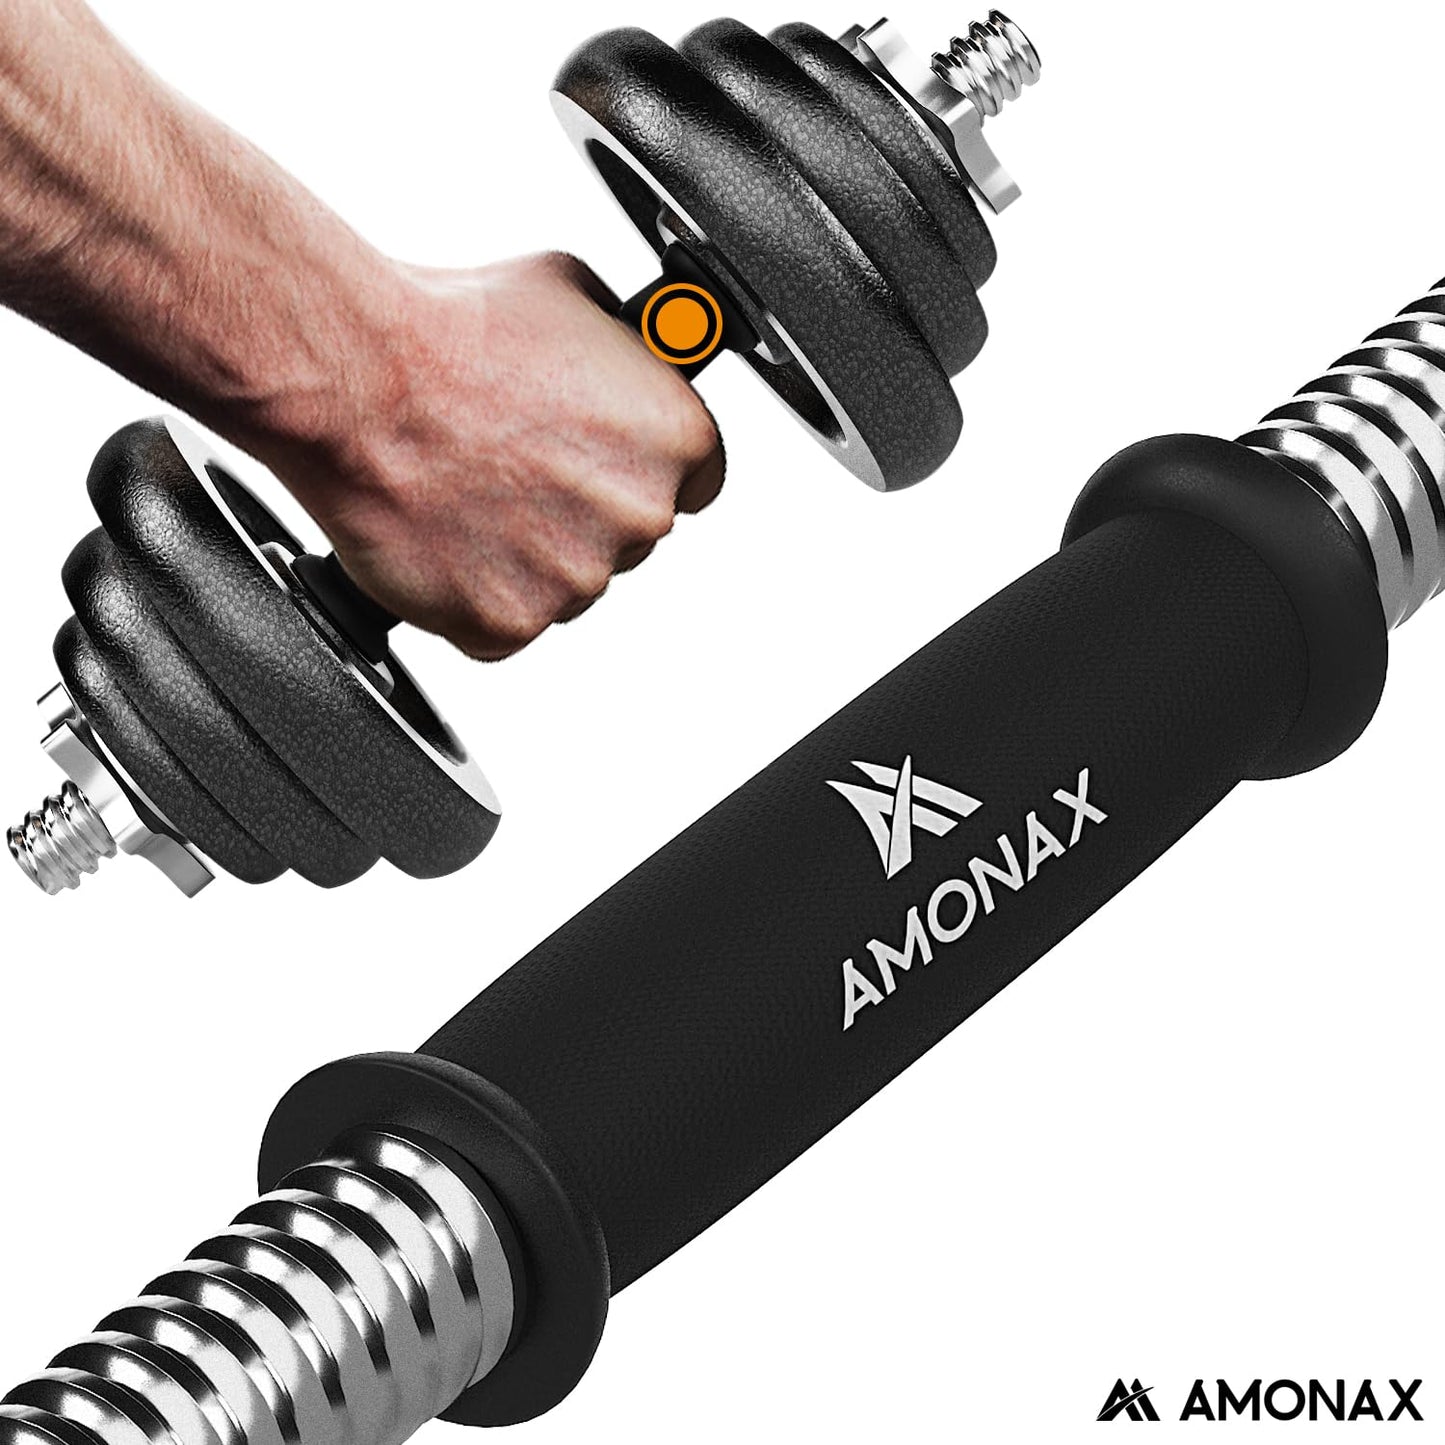 Amonax 20kg Cast Iron Adjustable Dumbbells Weight Set, Barbell Set Men Women, Strength Training Equipment Home Gym Fitness, Dumbell Pair Hand Weight, Bar Bells Free Weights for Weight Lifting, 20KG